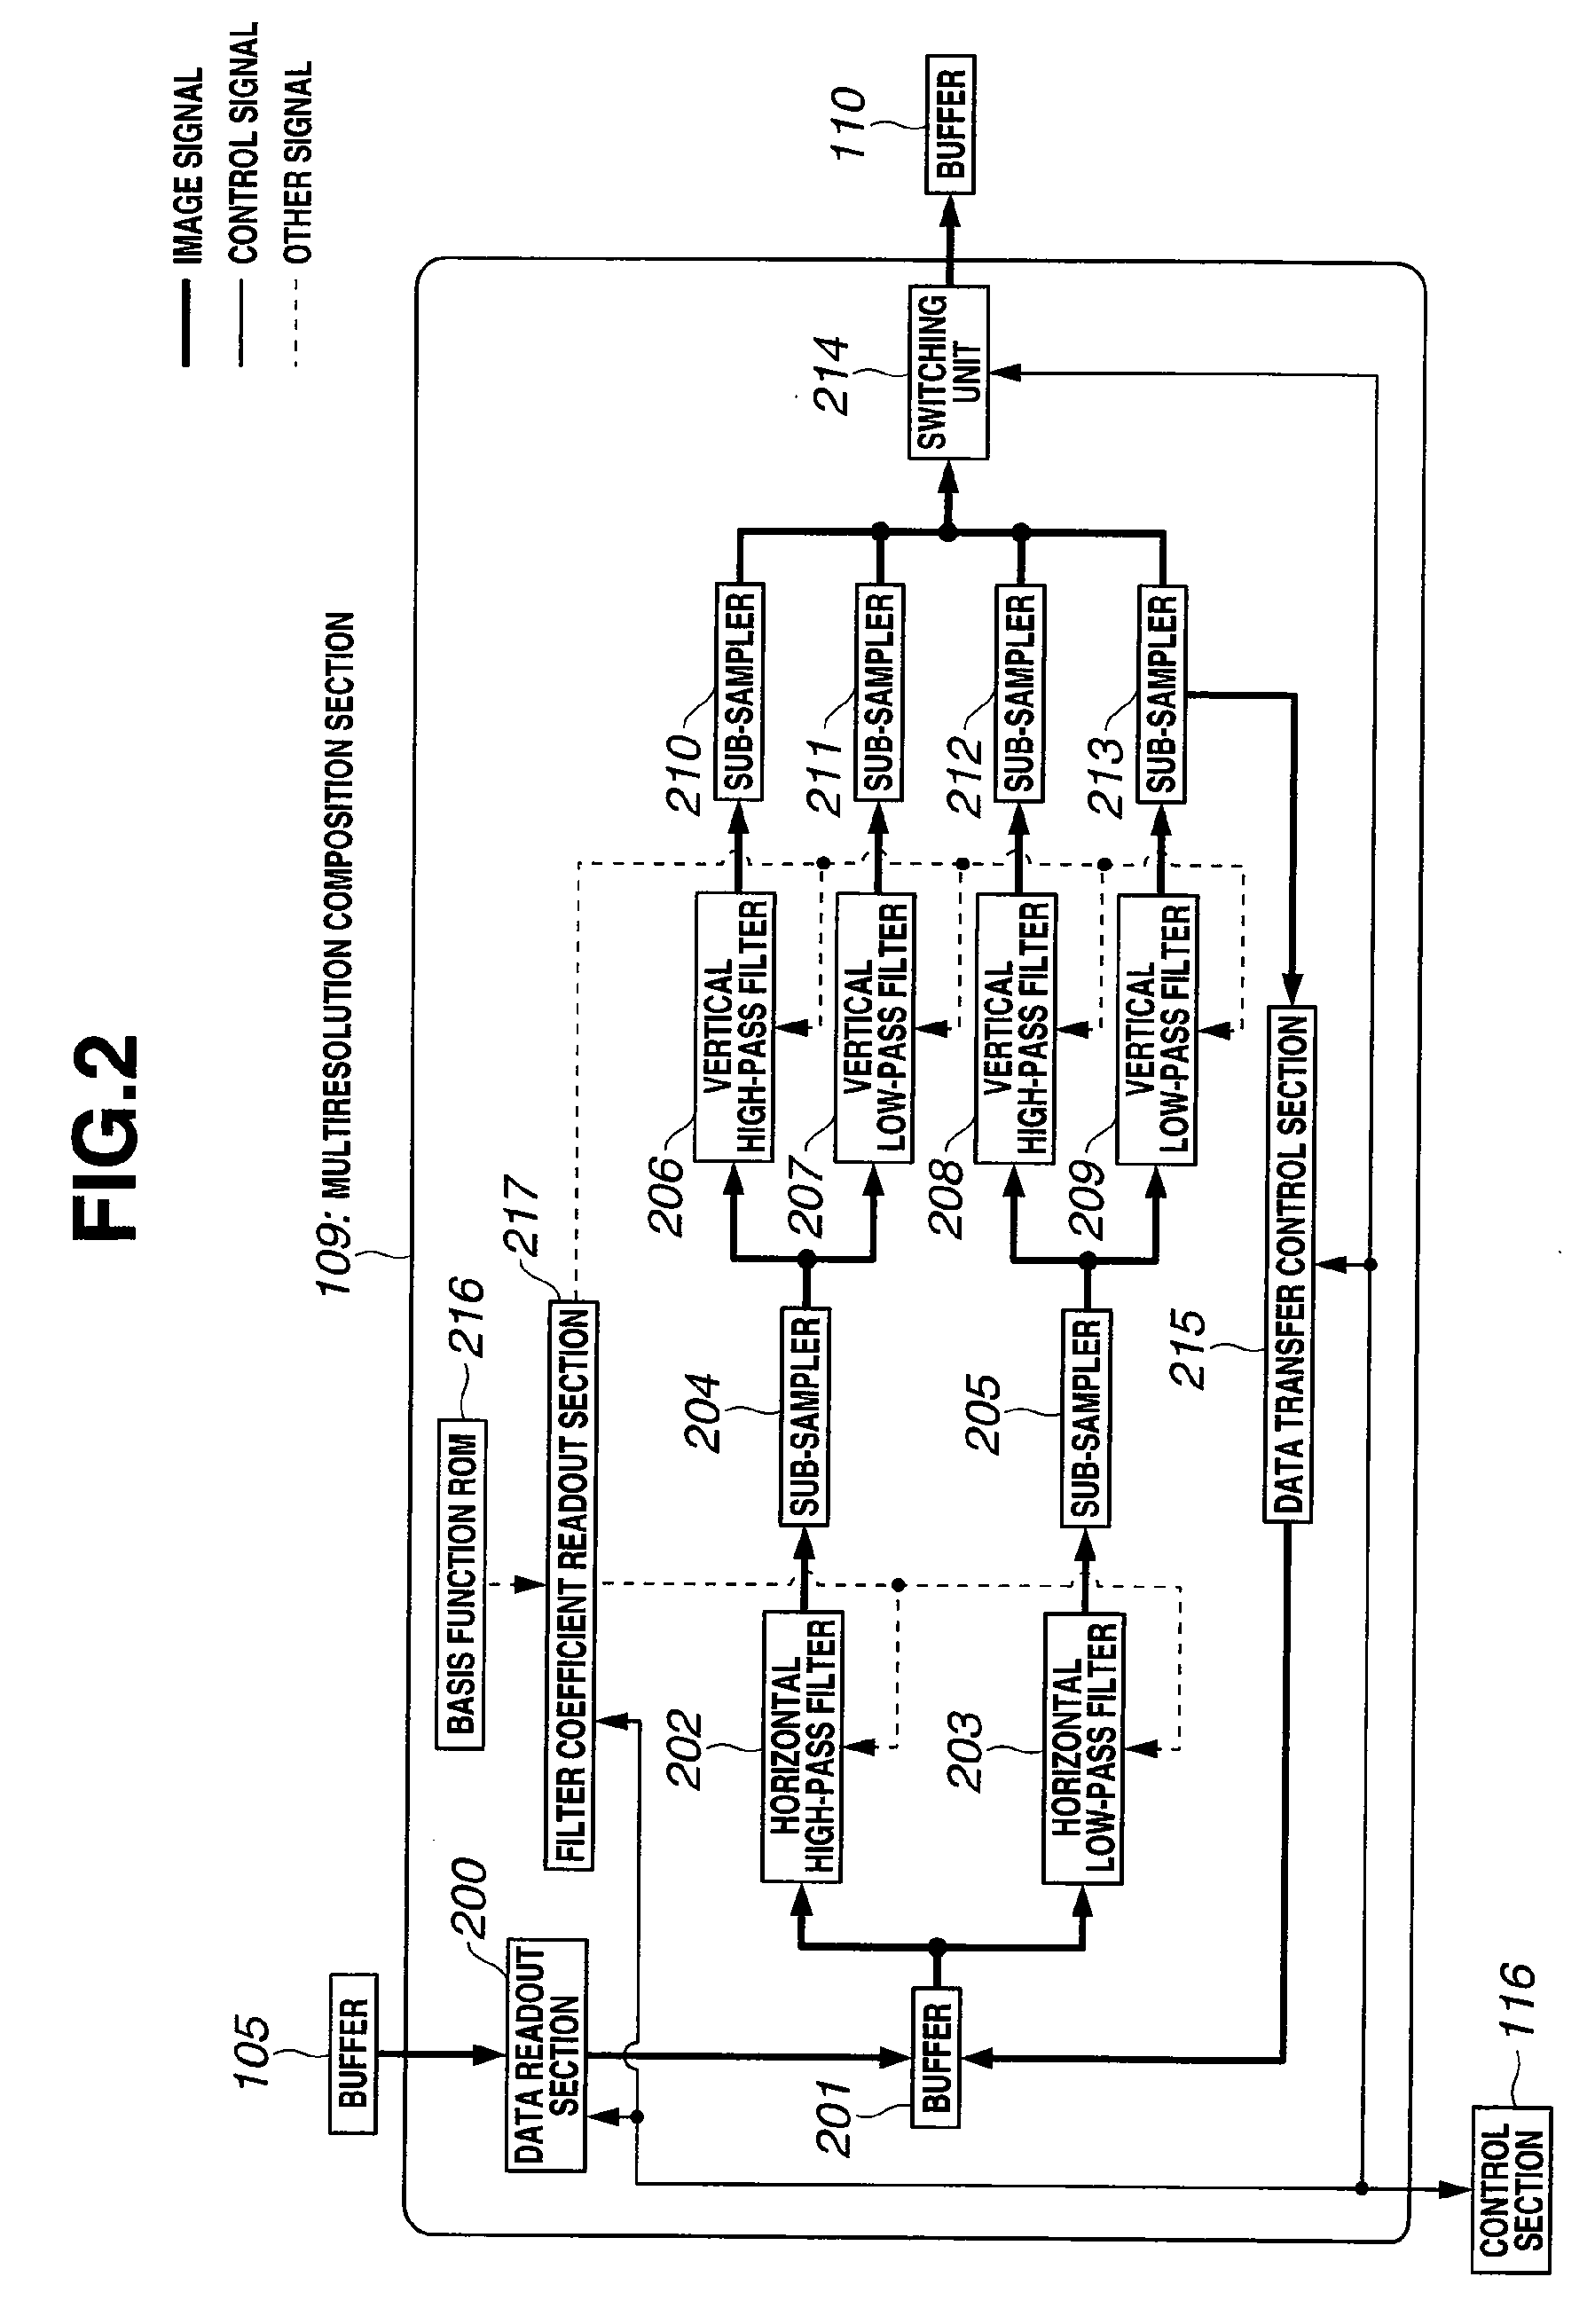 Image processing system, image processing method, and computer program product